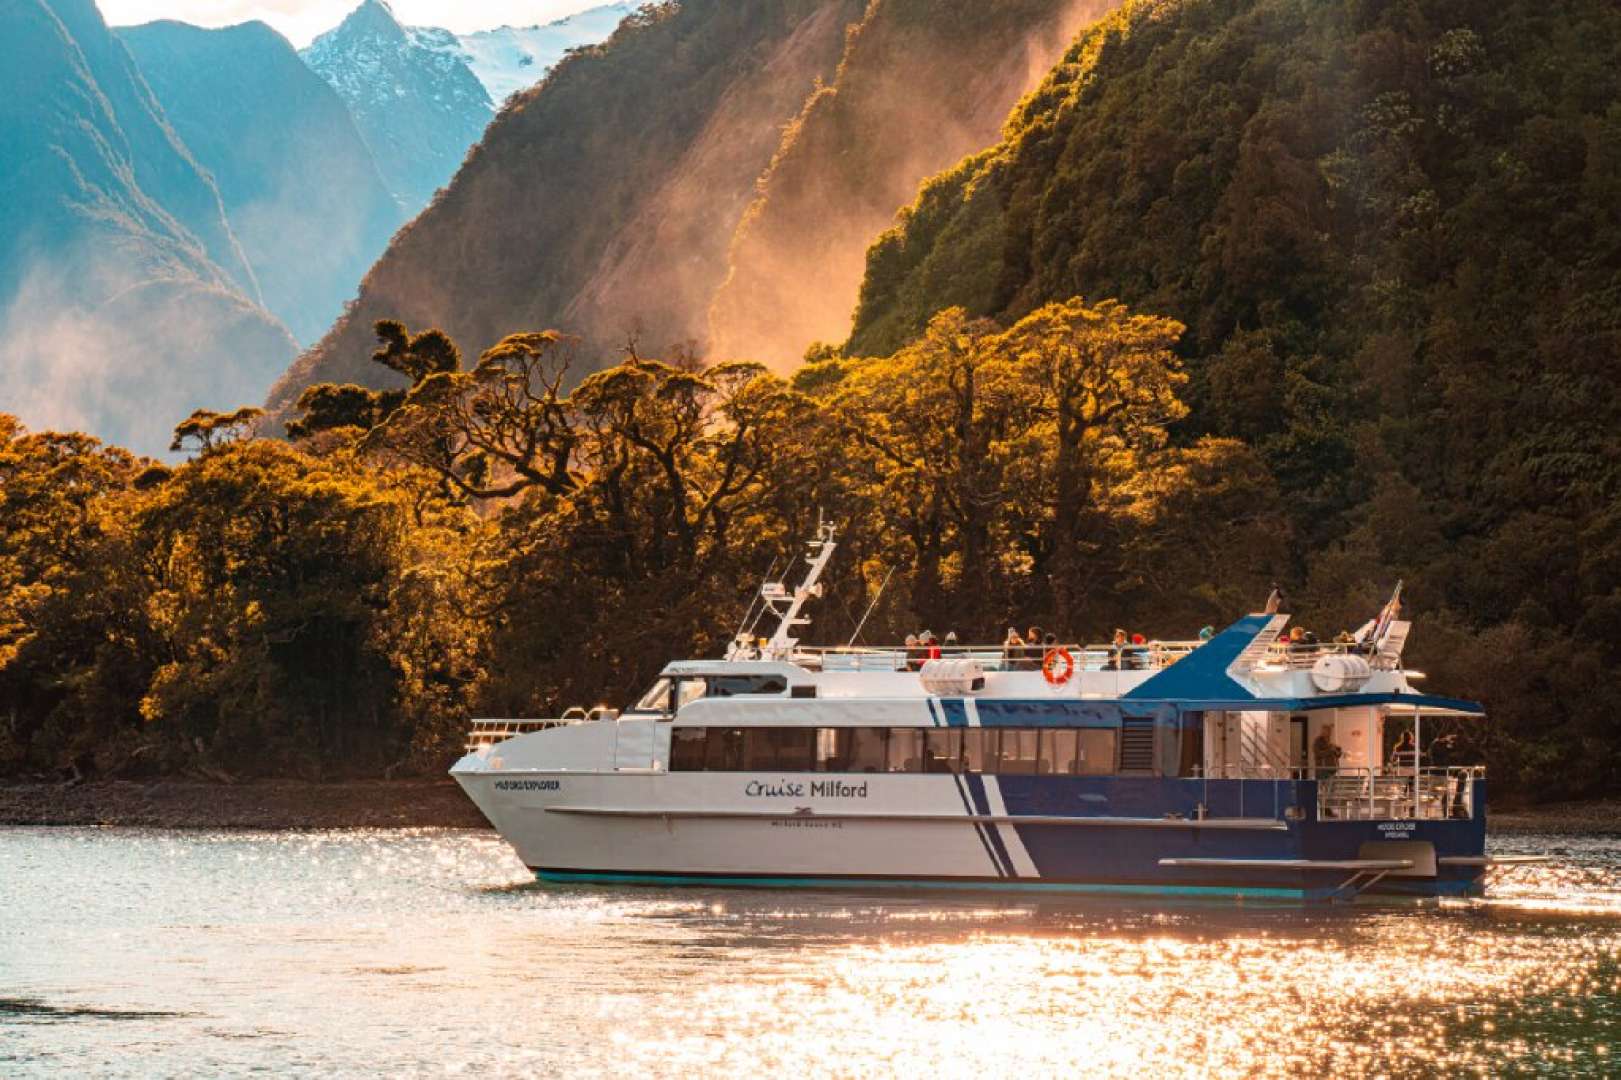 Milford Sound New Zealand Boat Cruise With Stunning Views NZ Top Attraction